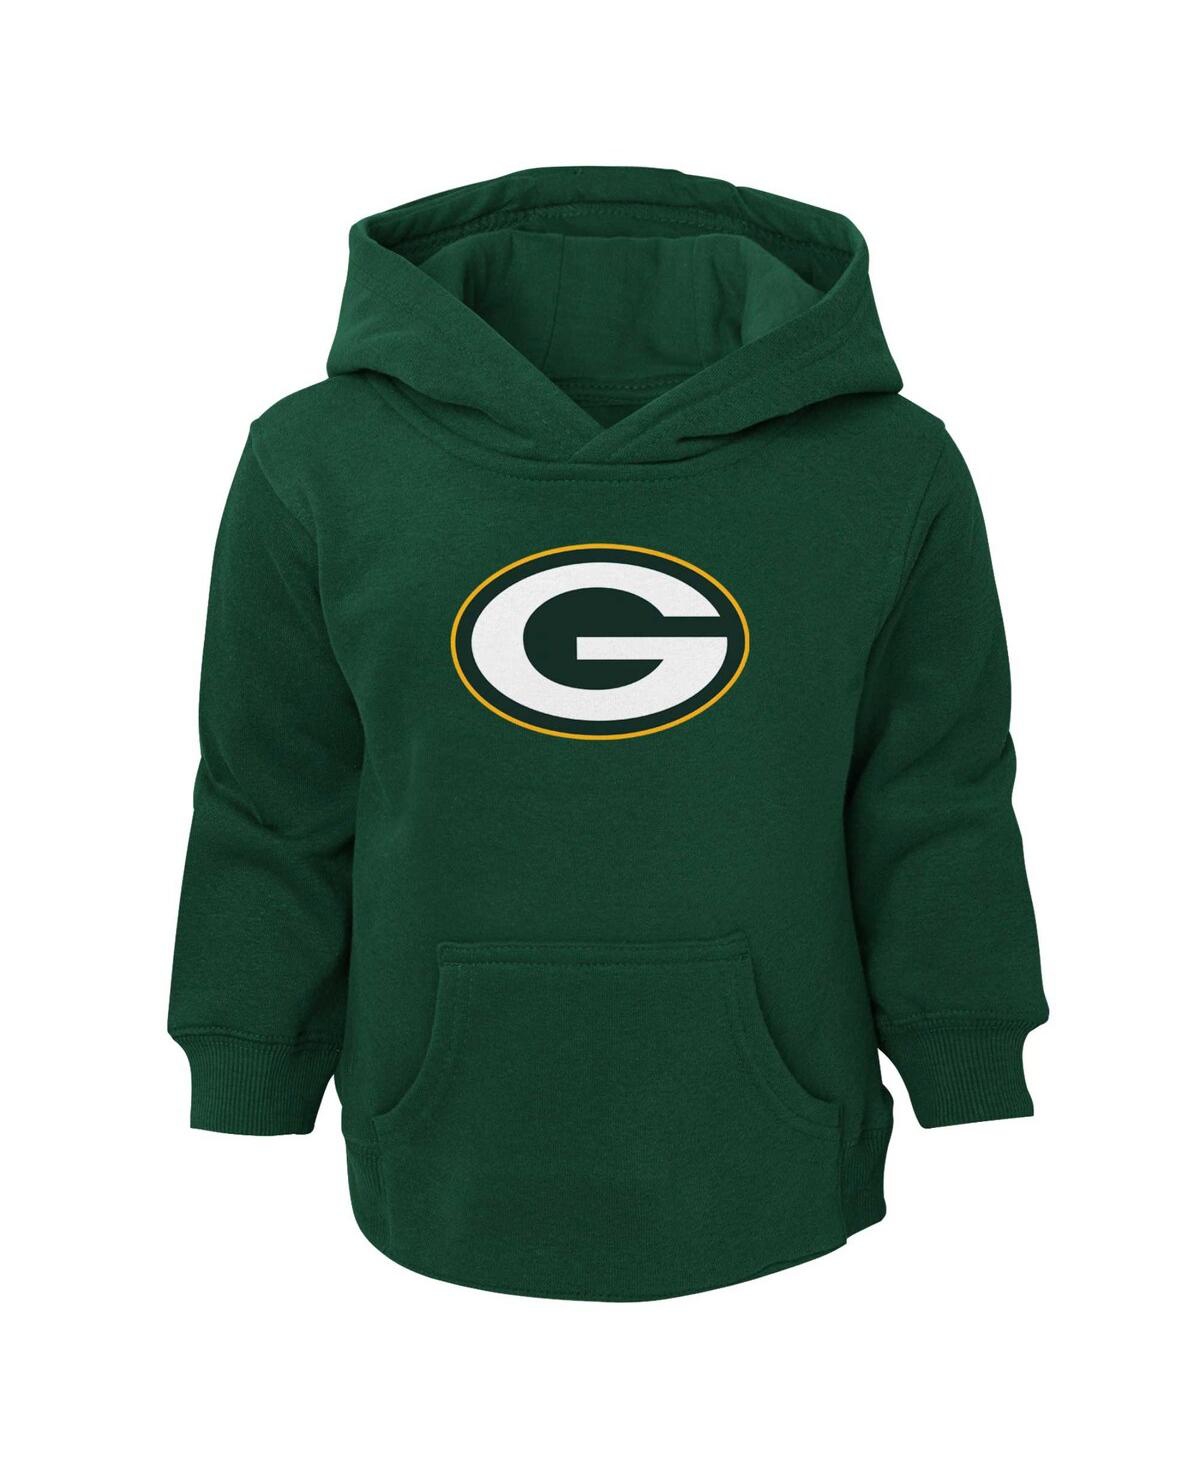 Shop Outerstuff Toddler Green Green Bay Packers Logo Pullover Hoodie